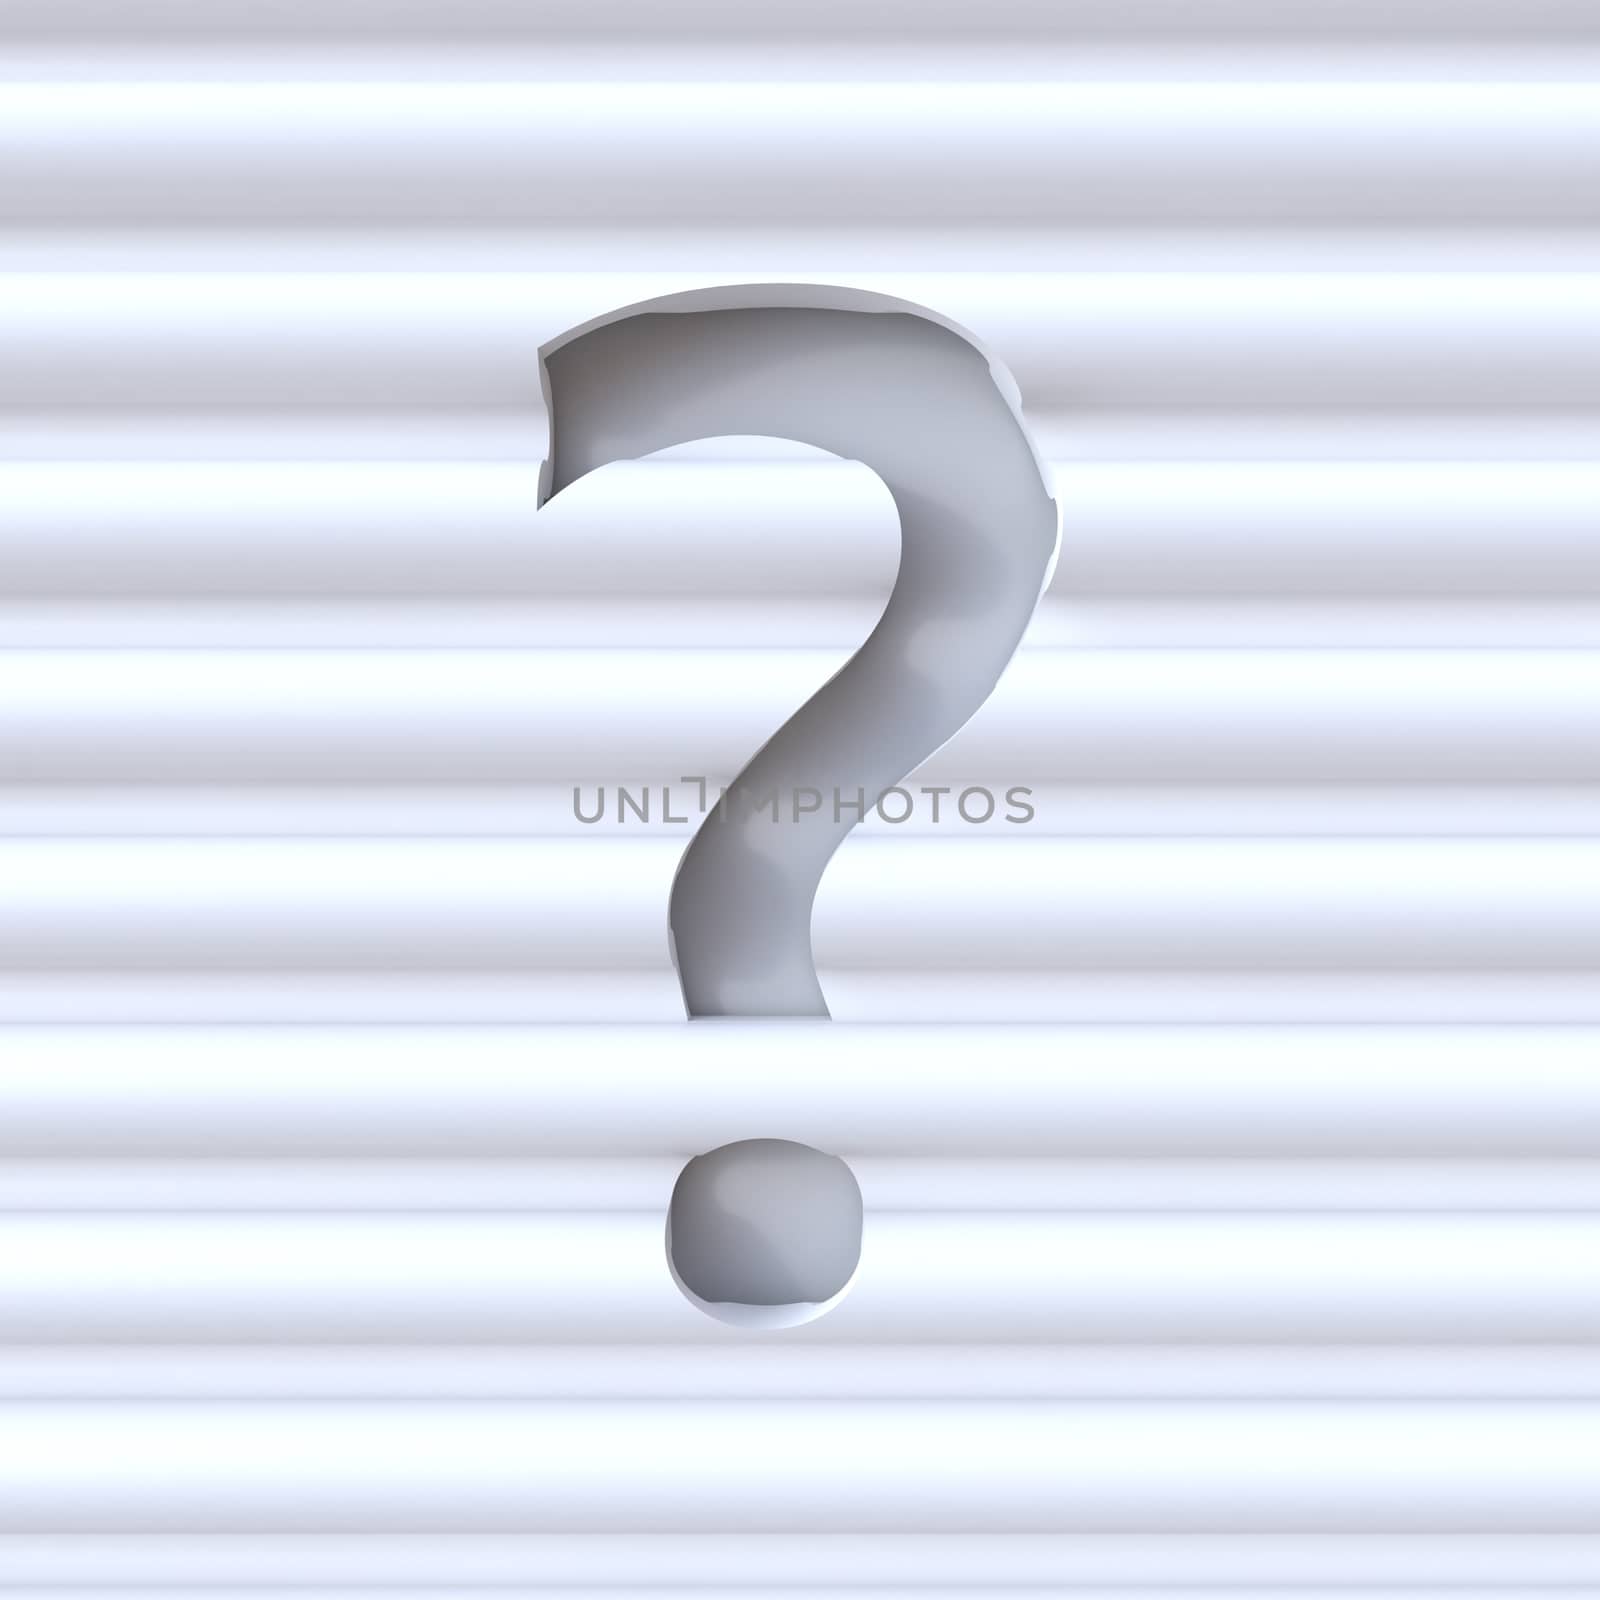 Cut out font in wave surface punctuation mark QUESTION MARK 3D rendering illustration